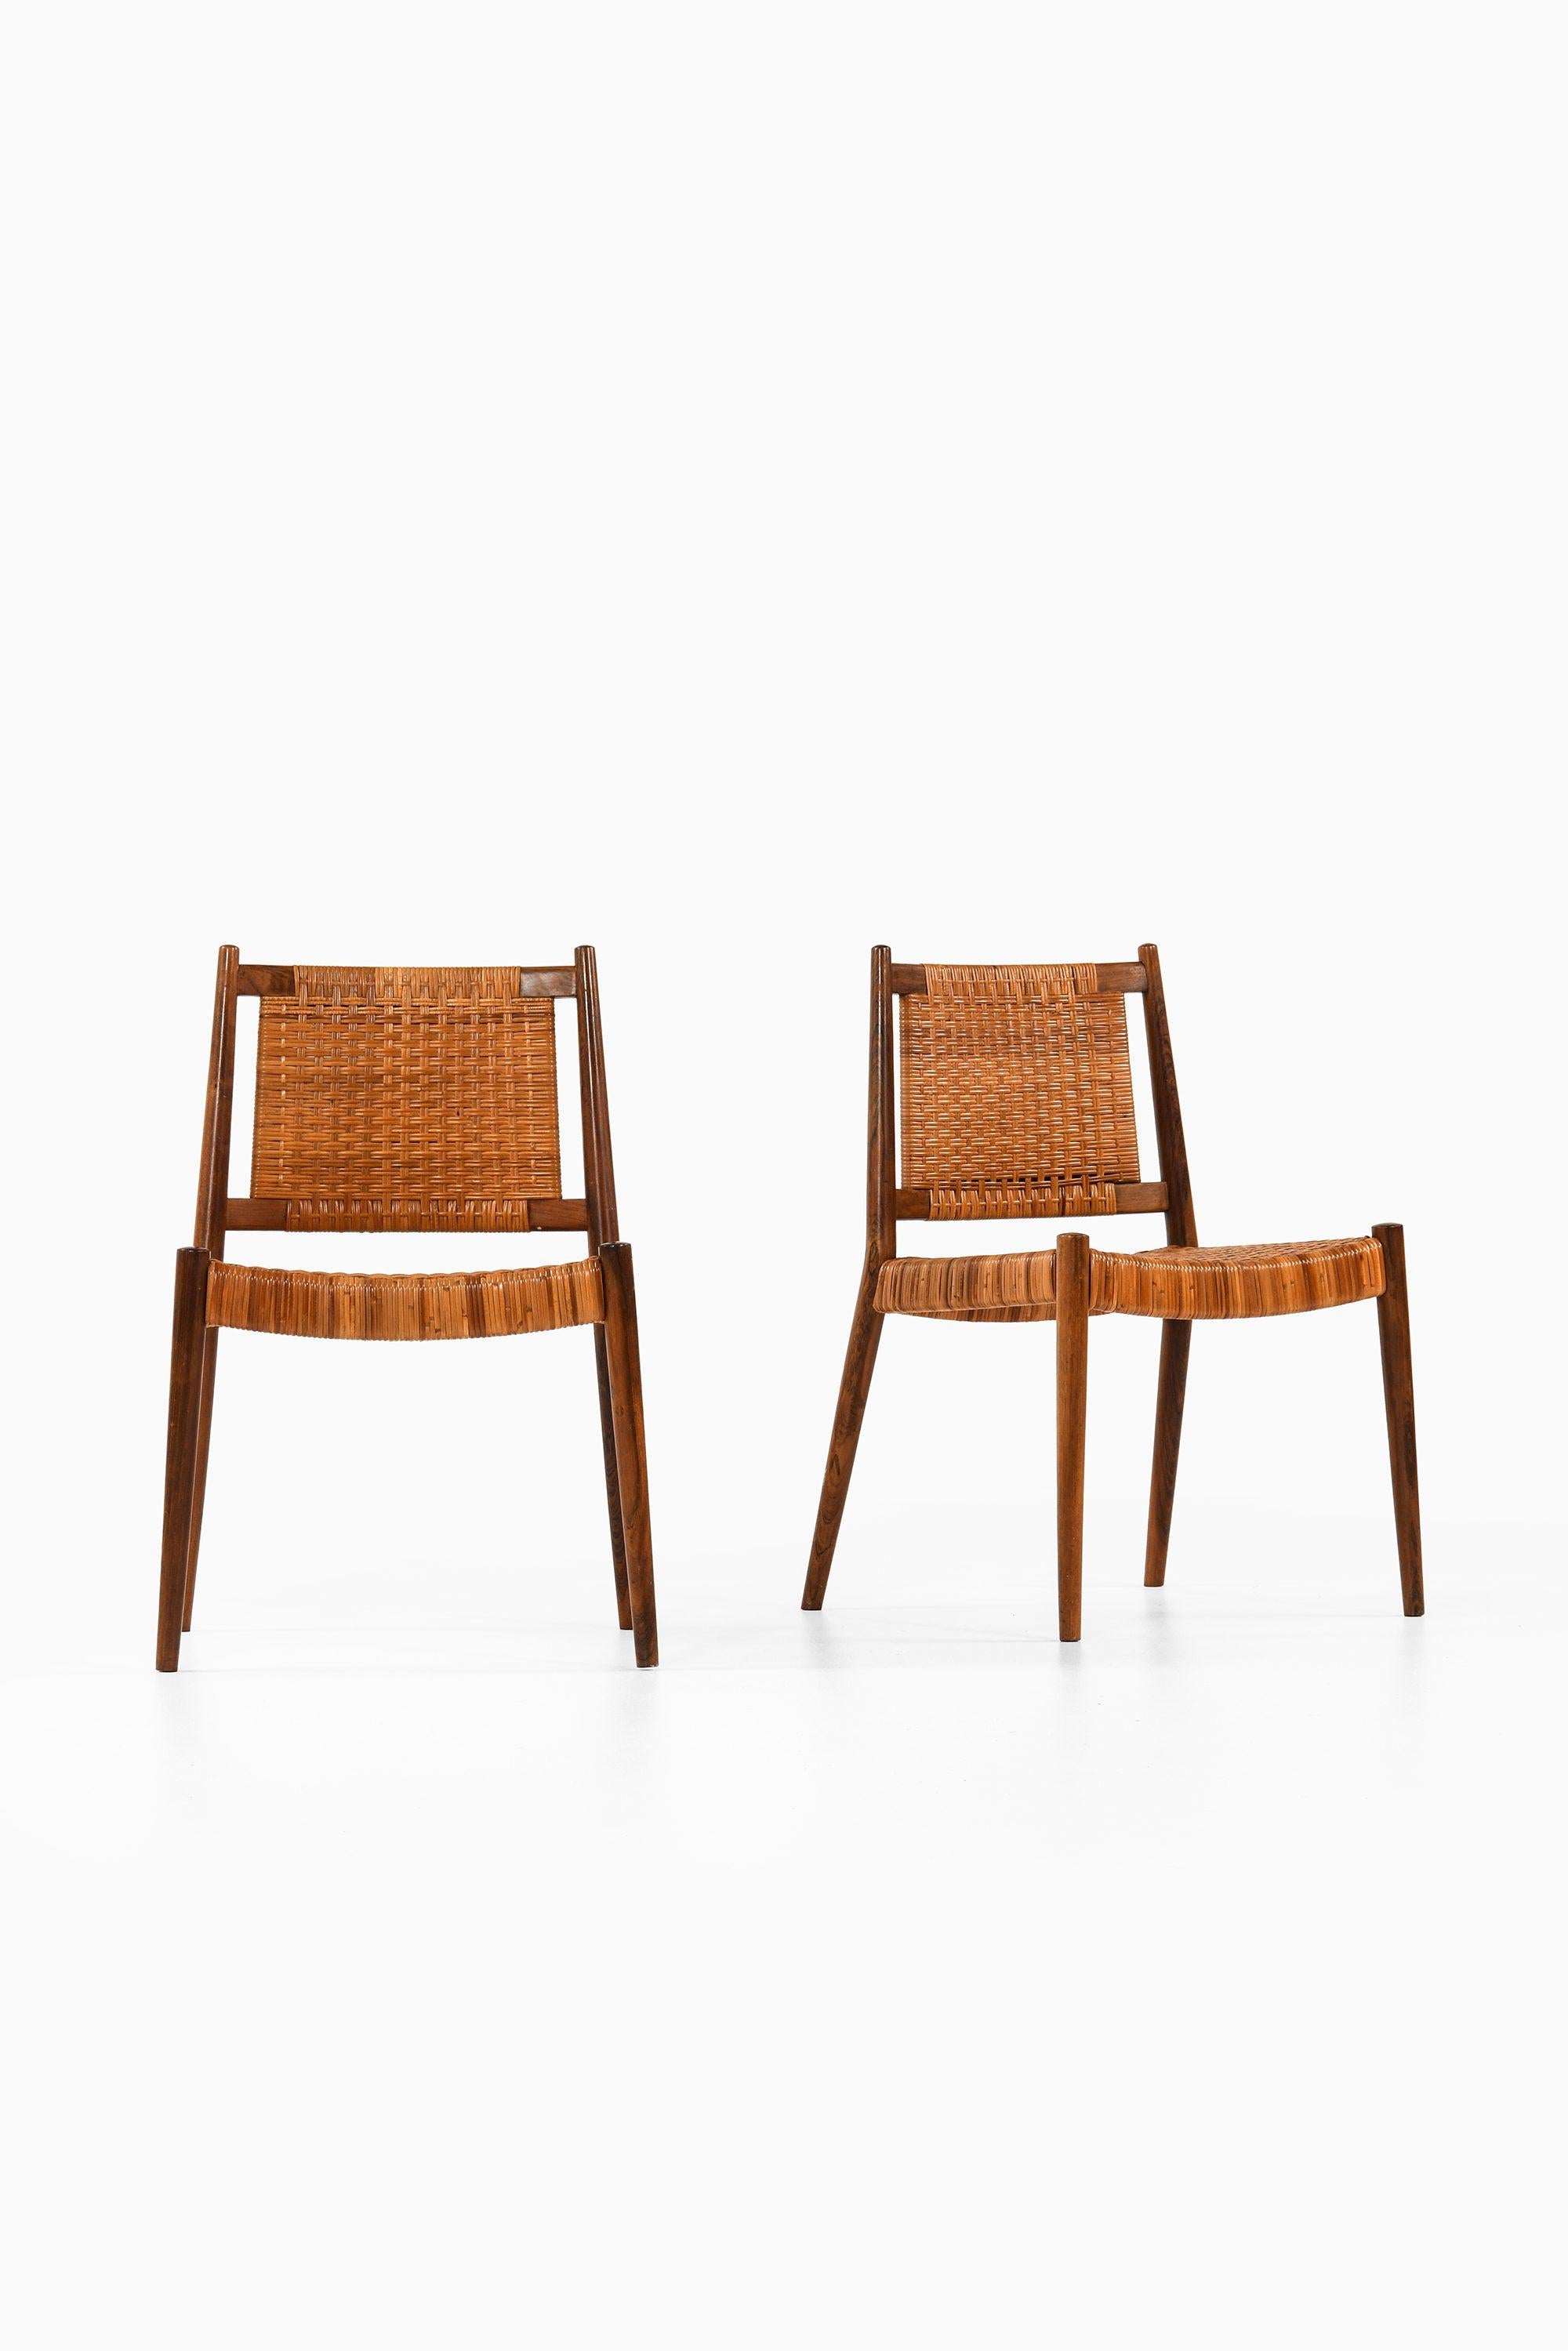 Scandinavian Modern Set of 8 Dining Chairs in Rosewood and Woven Cane by Steffan Syrach-Larsen, 1960 For Sale